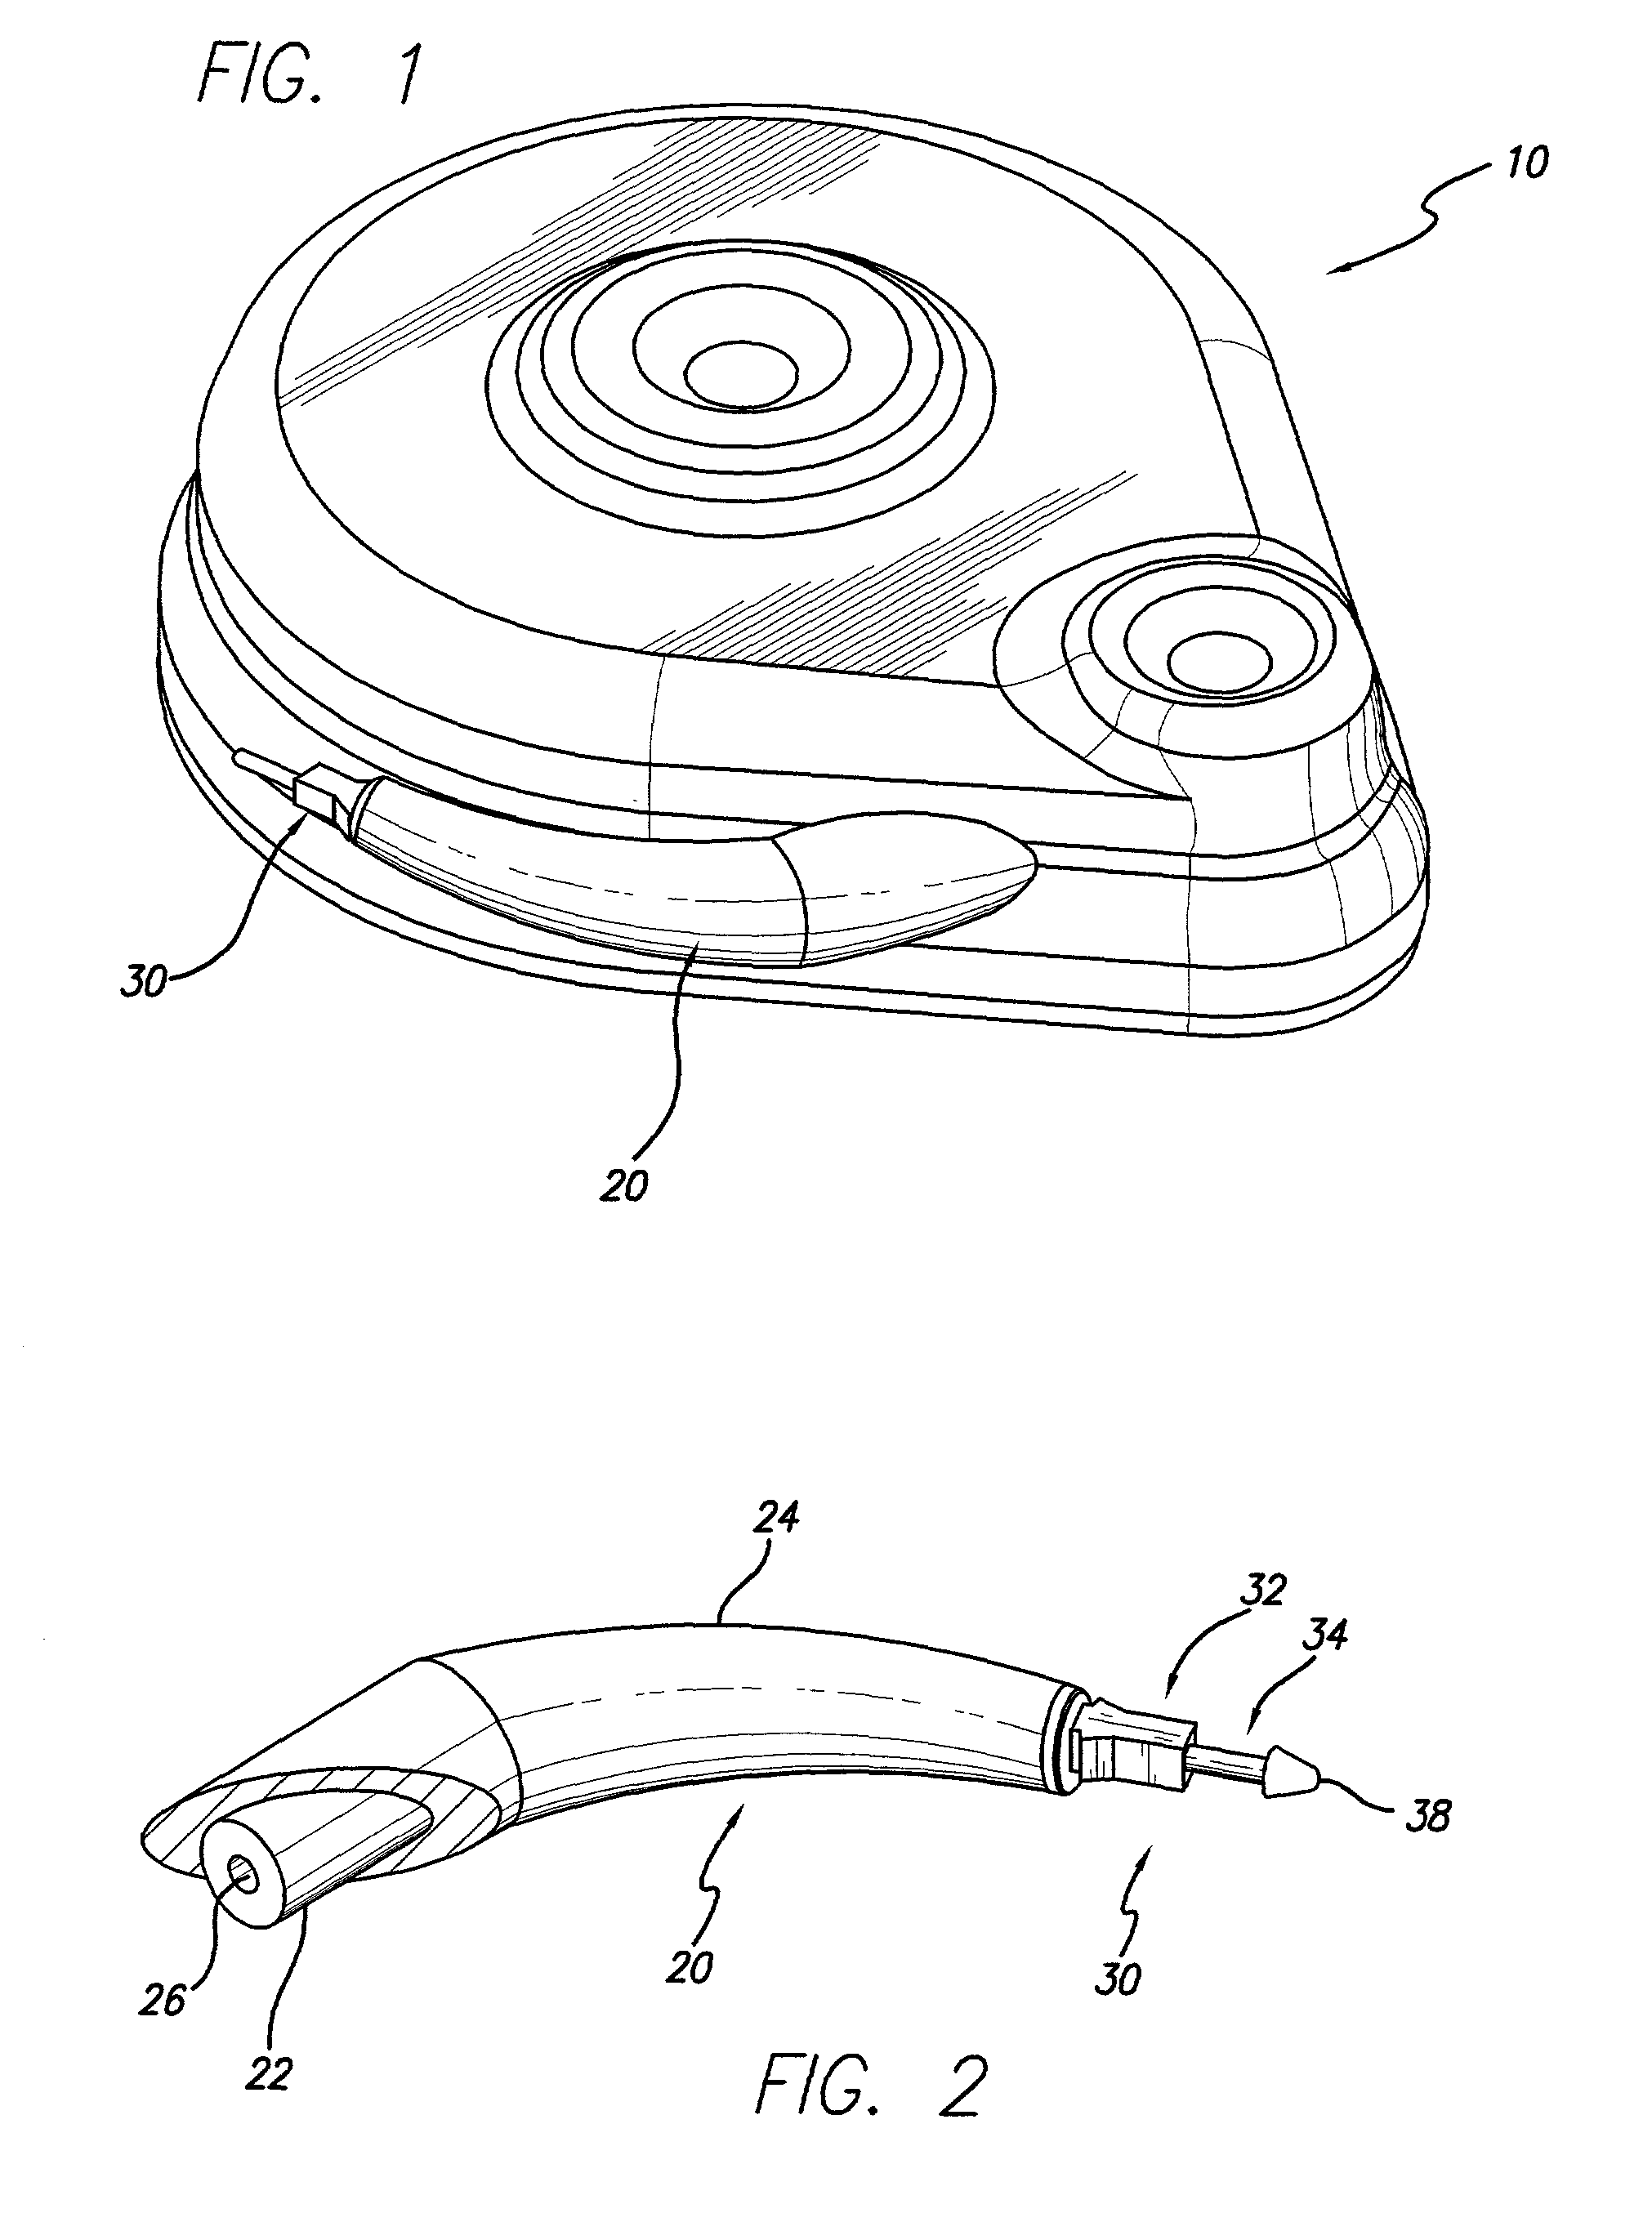 Implantable pump connector for catheter attachment